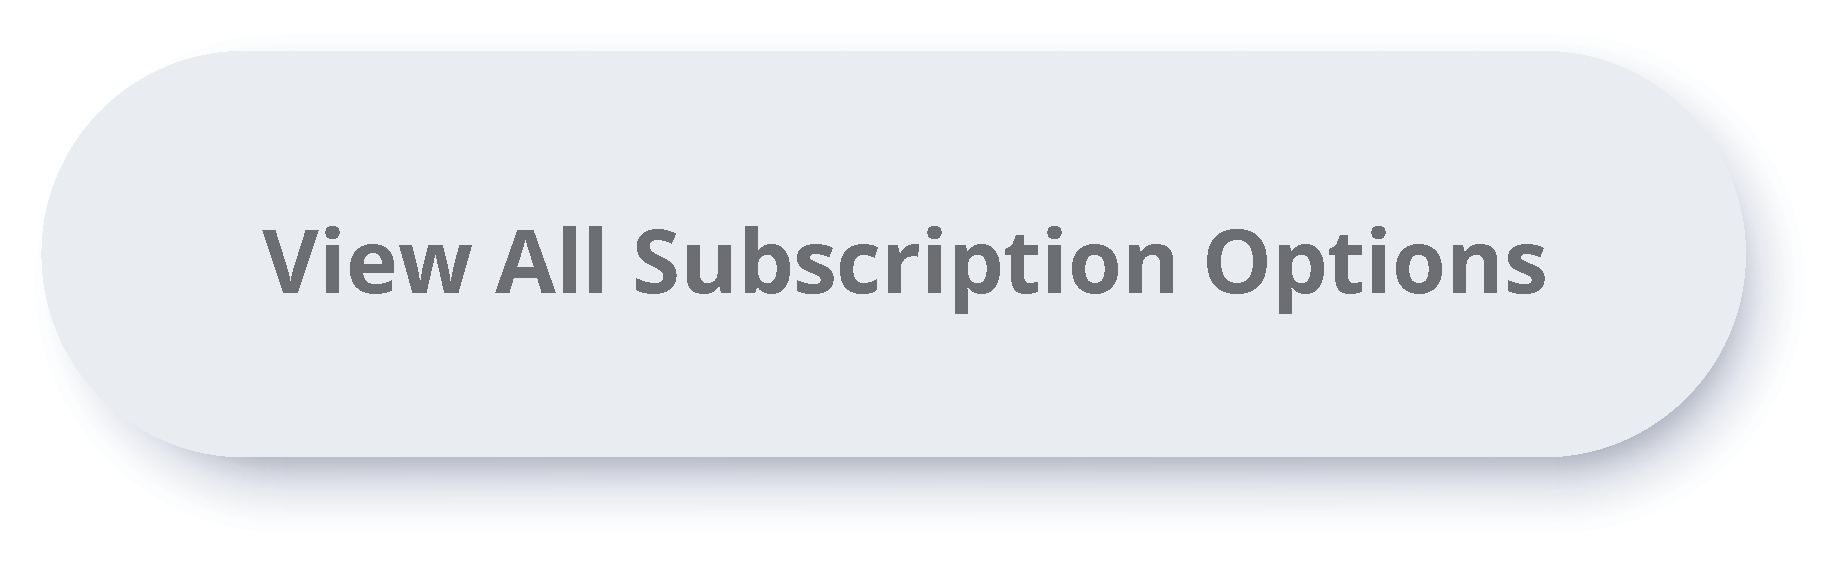 view all subscription options